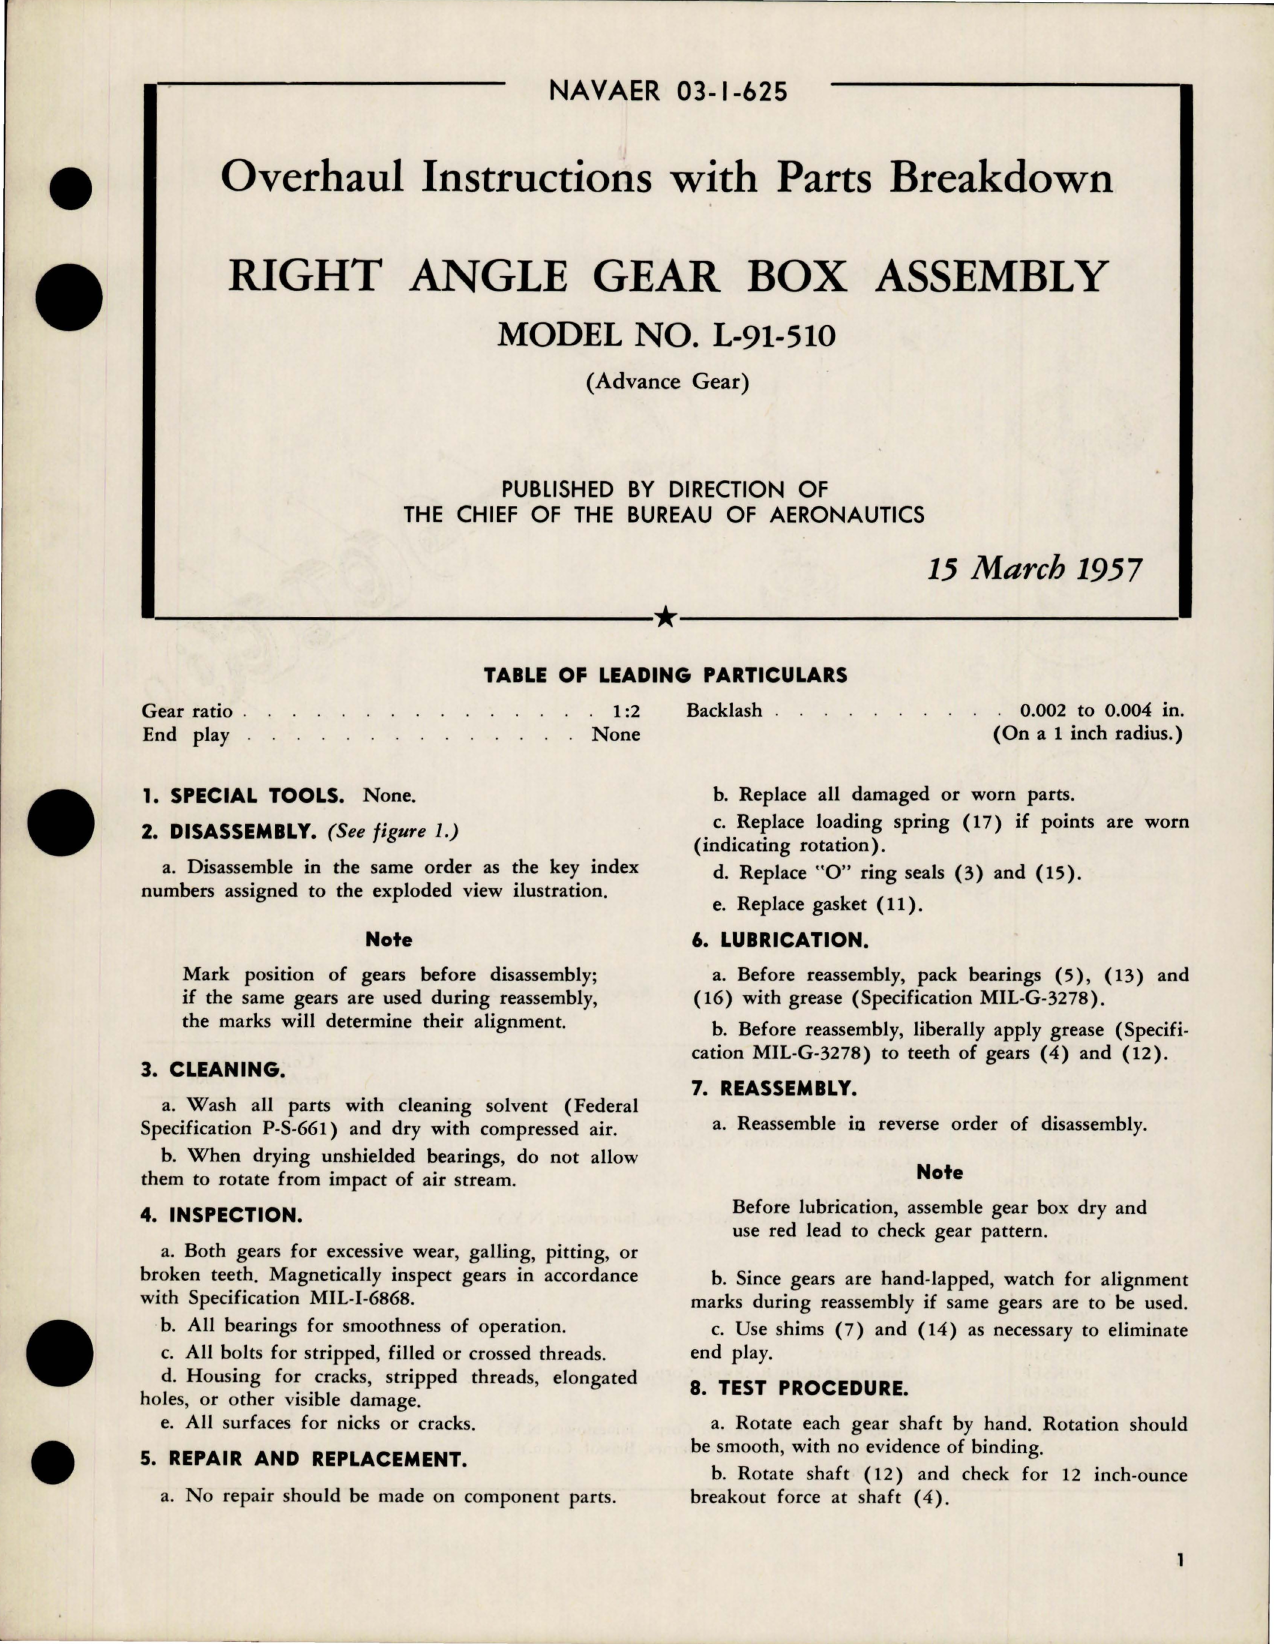 Sample page 1 from AirCorps Library document: Overhaul Instructions with Parts Breakdown for Right Angle Gear Box Assembly - Model L-91-510 